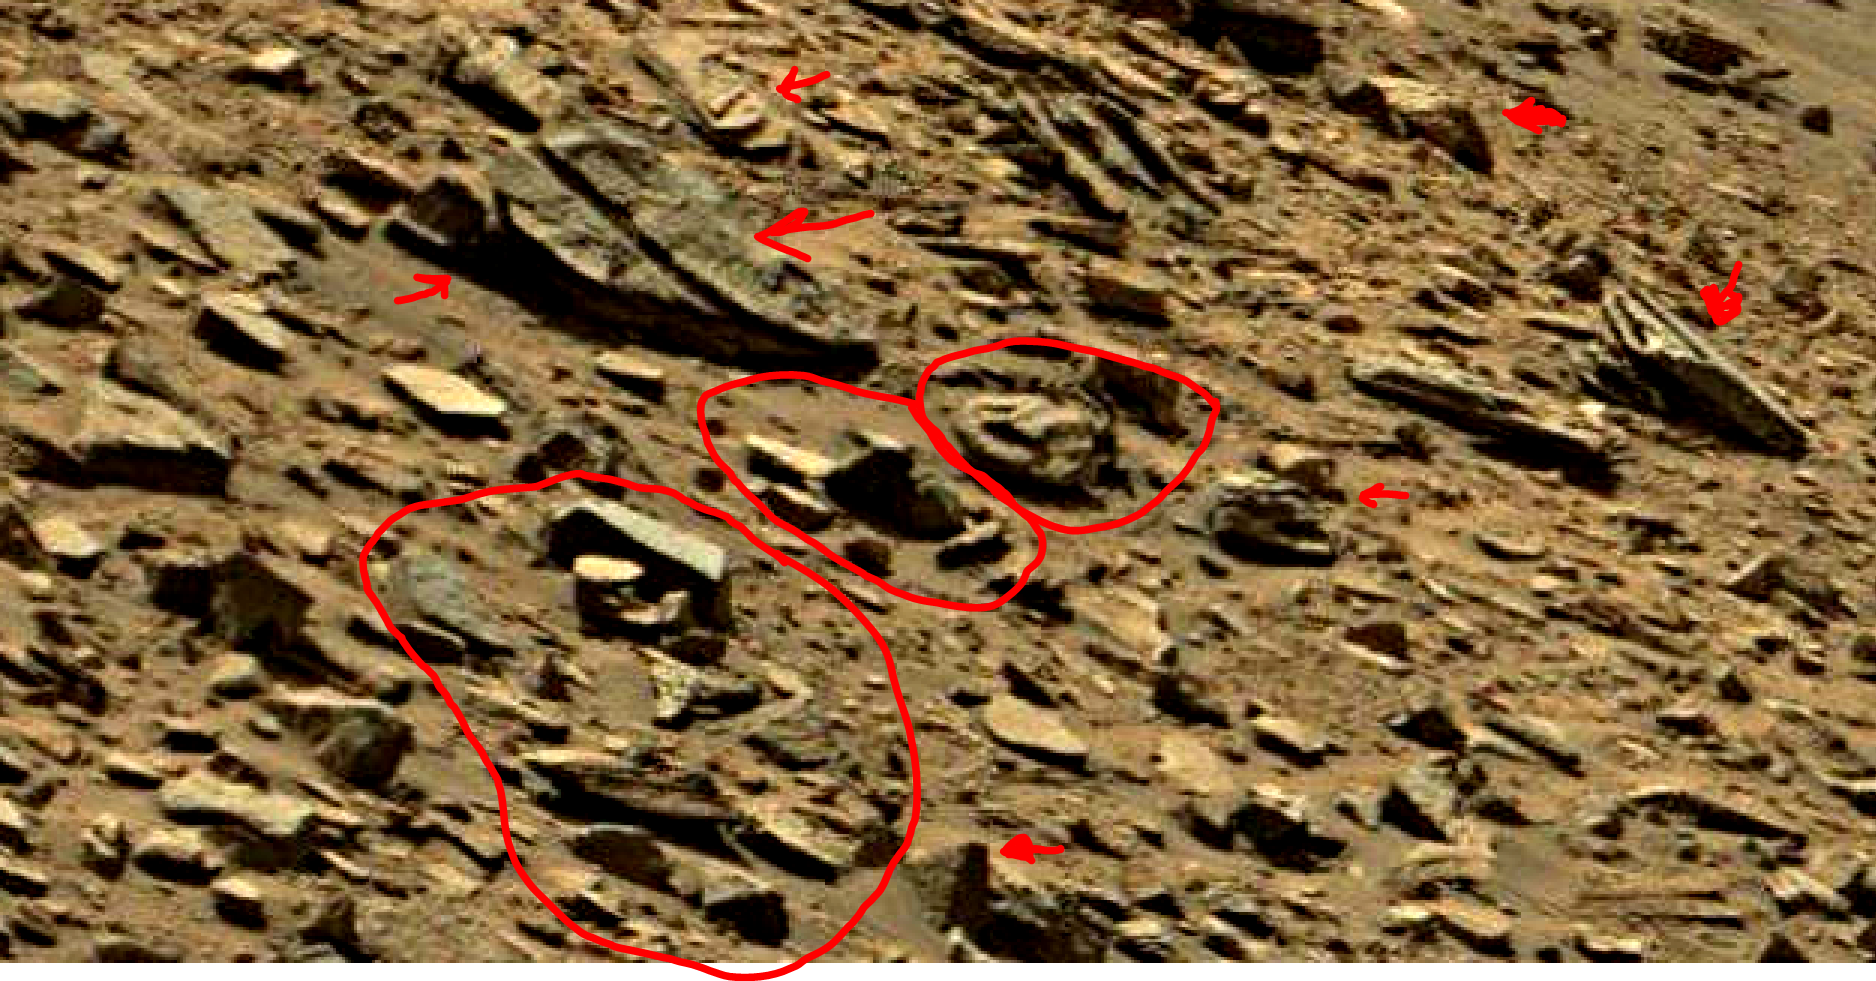 mars sol 1434 anomaly artifacts 8a was life on mars